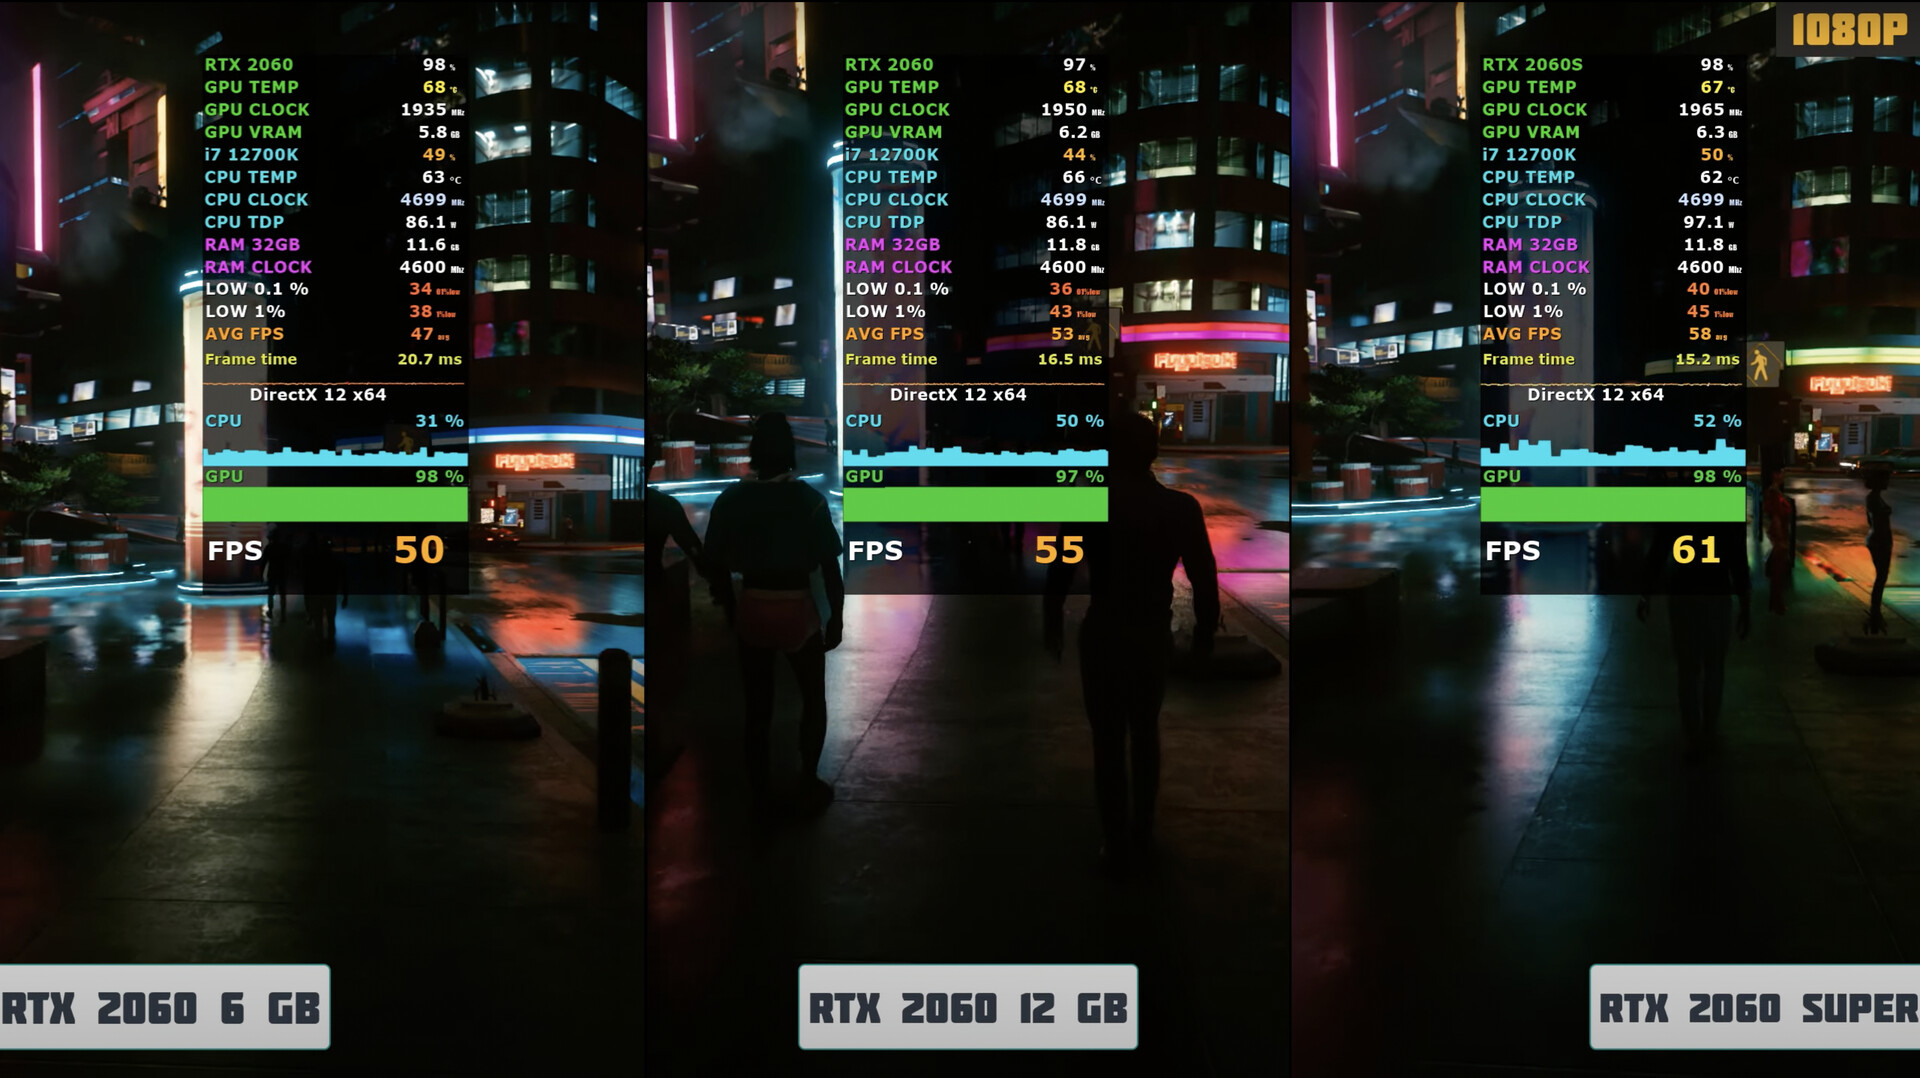 instans nederdel elektronisk GeForce RTX 2060 (12 GB): Early gaming benchmark show NVIDIA's new €700  desktop graphics card is consistently slower than the RTX 2060 SUPER -  NotebookCheck.net News